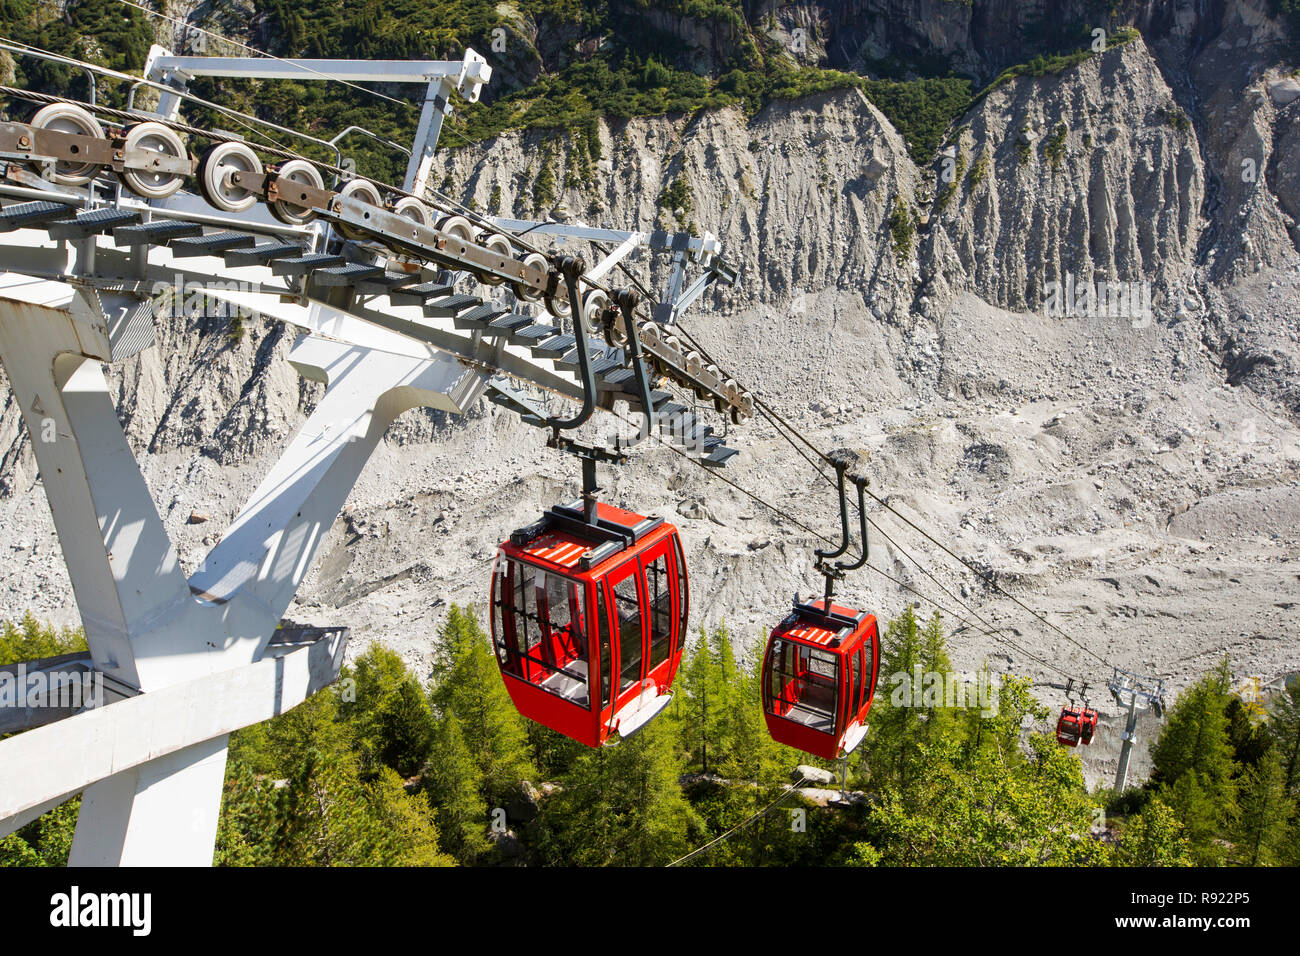 A Cable car taking tourists down from the Montenvers Railway station onto the Mer De Glace. the railway was built in Victorian times to take tourists up to the glacier, it has subsequently thinned 150 meters since 1820, and retreated by 2300 Metres. In order to access the glacier, a cable car has had to be built to reach the ever shrinking glacier. Stock Photo